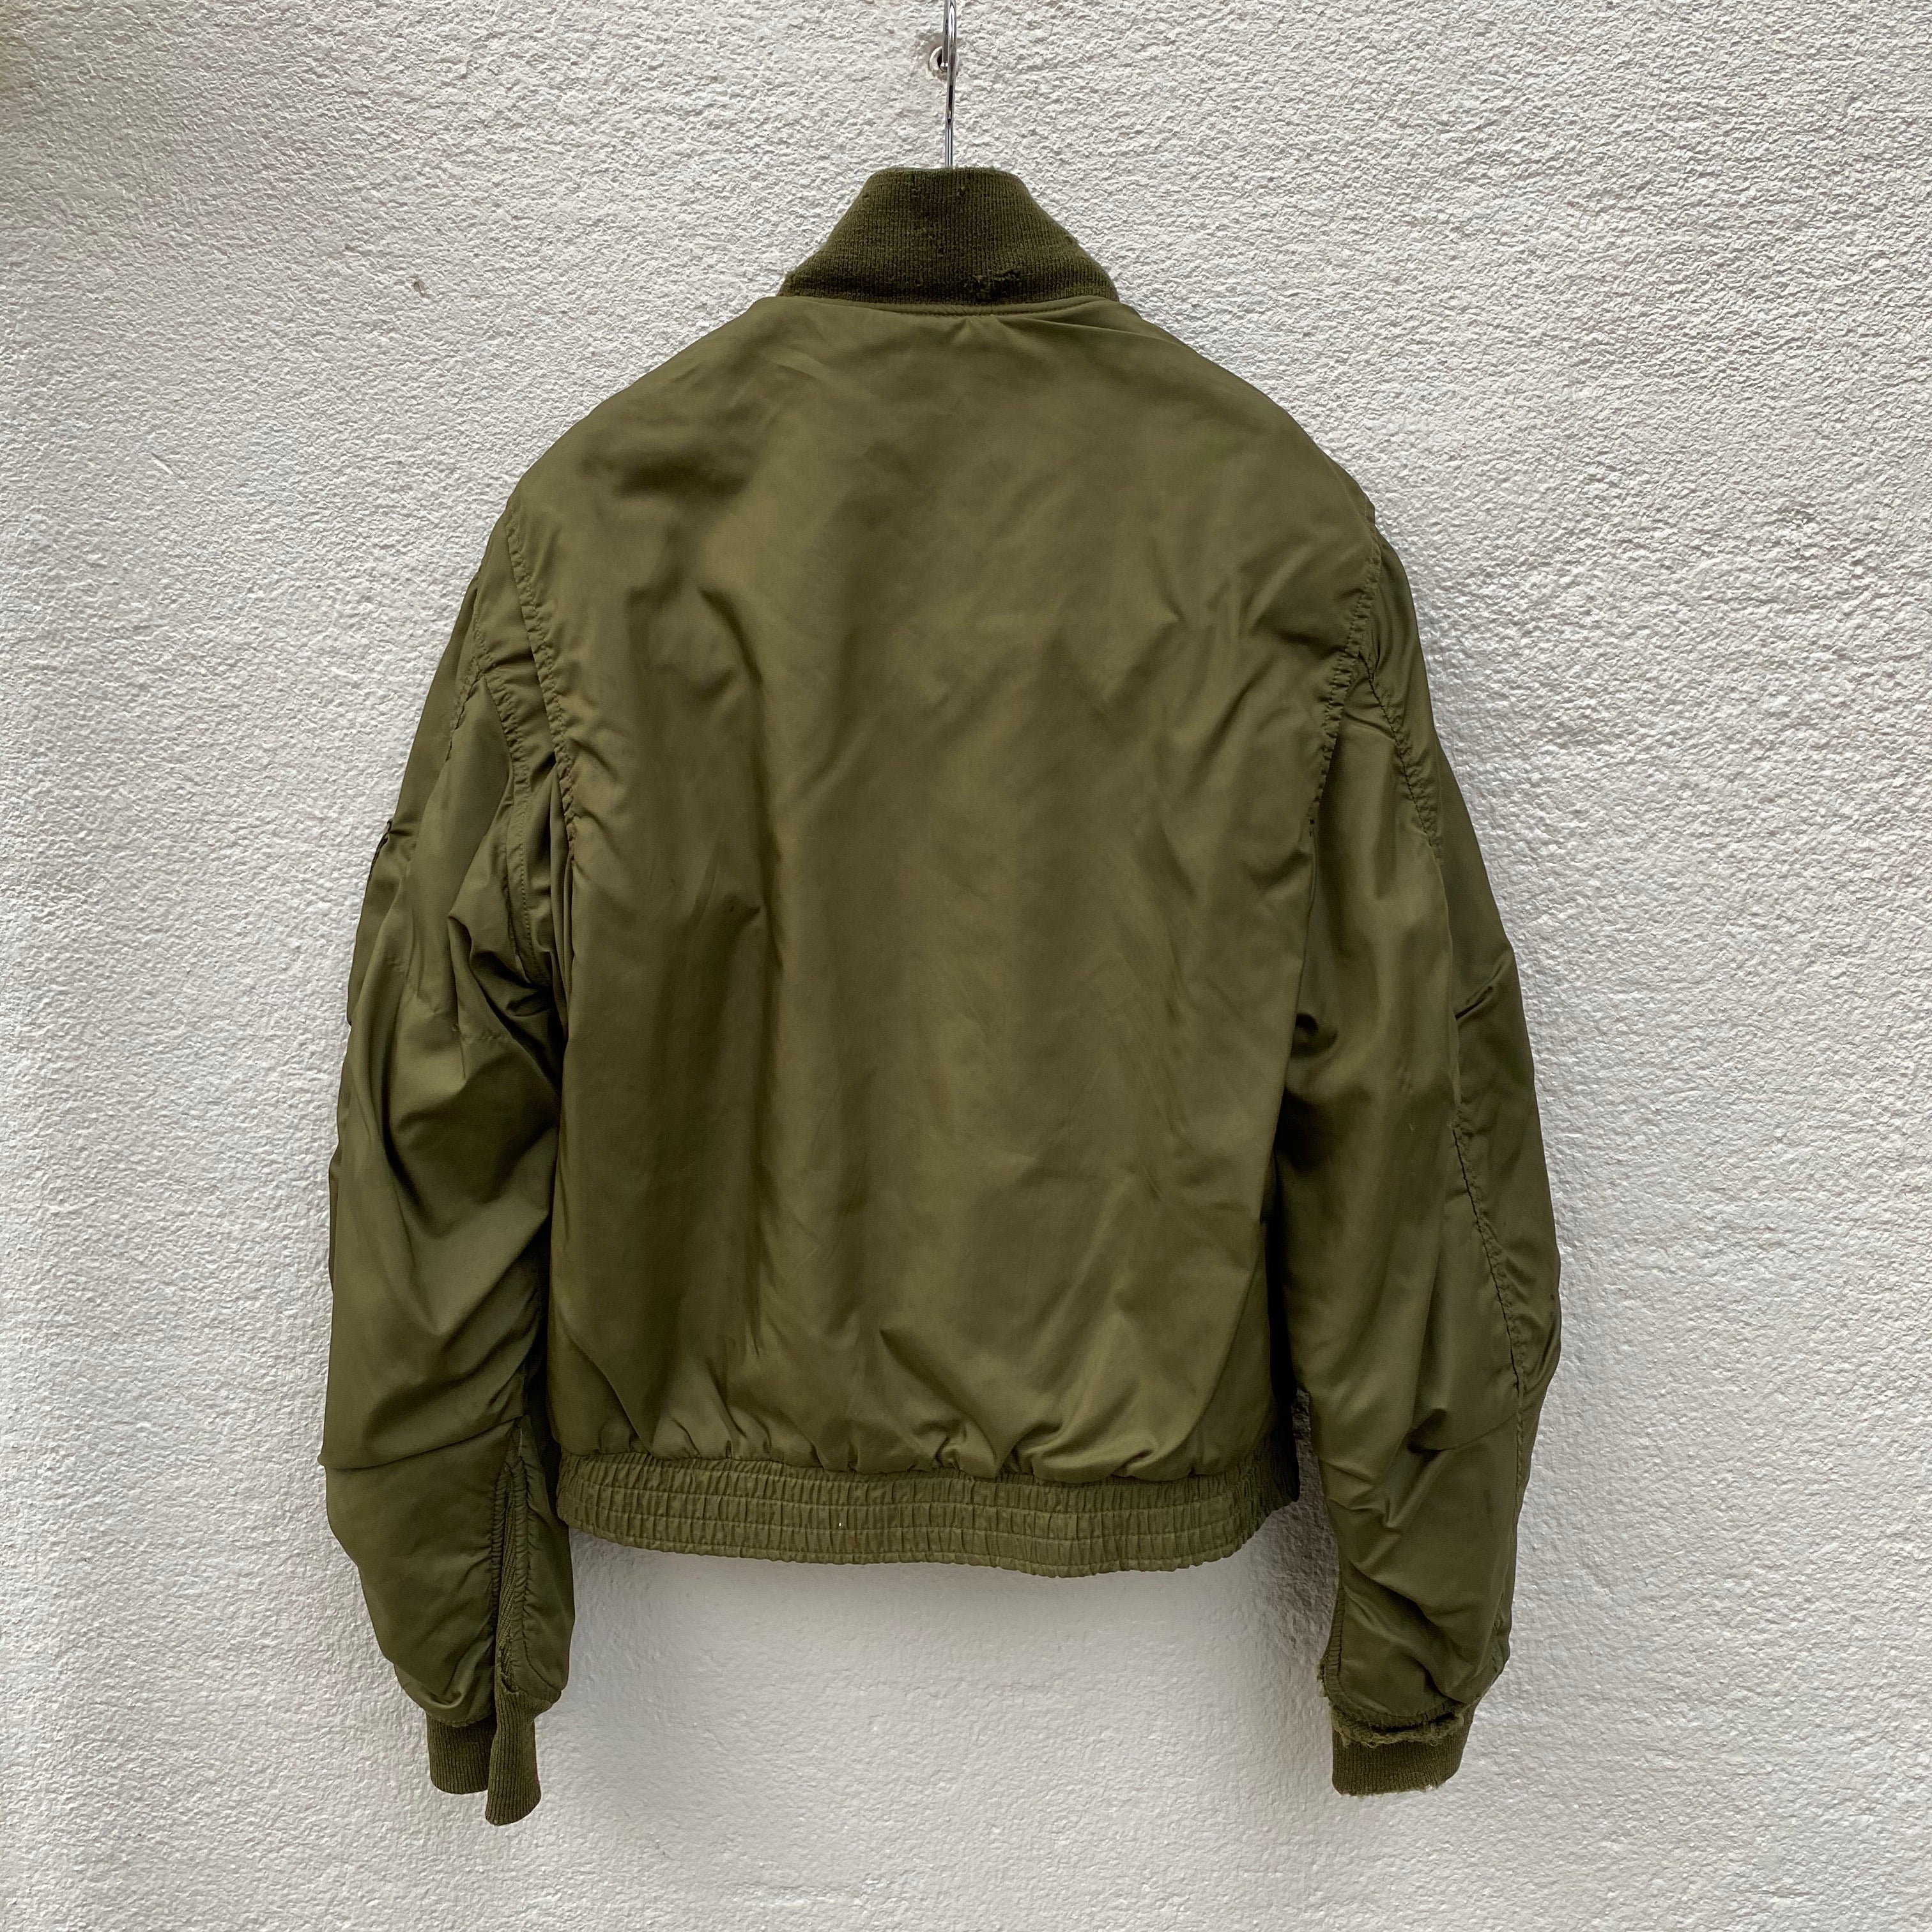 [ ONLY ONE ! ] USN G-8 "WEP" FRIGHT JACKET / Mr.Clean Select